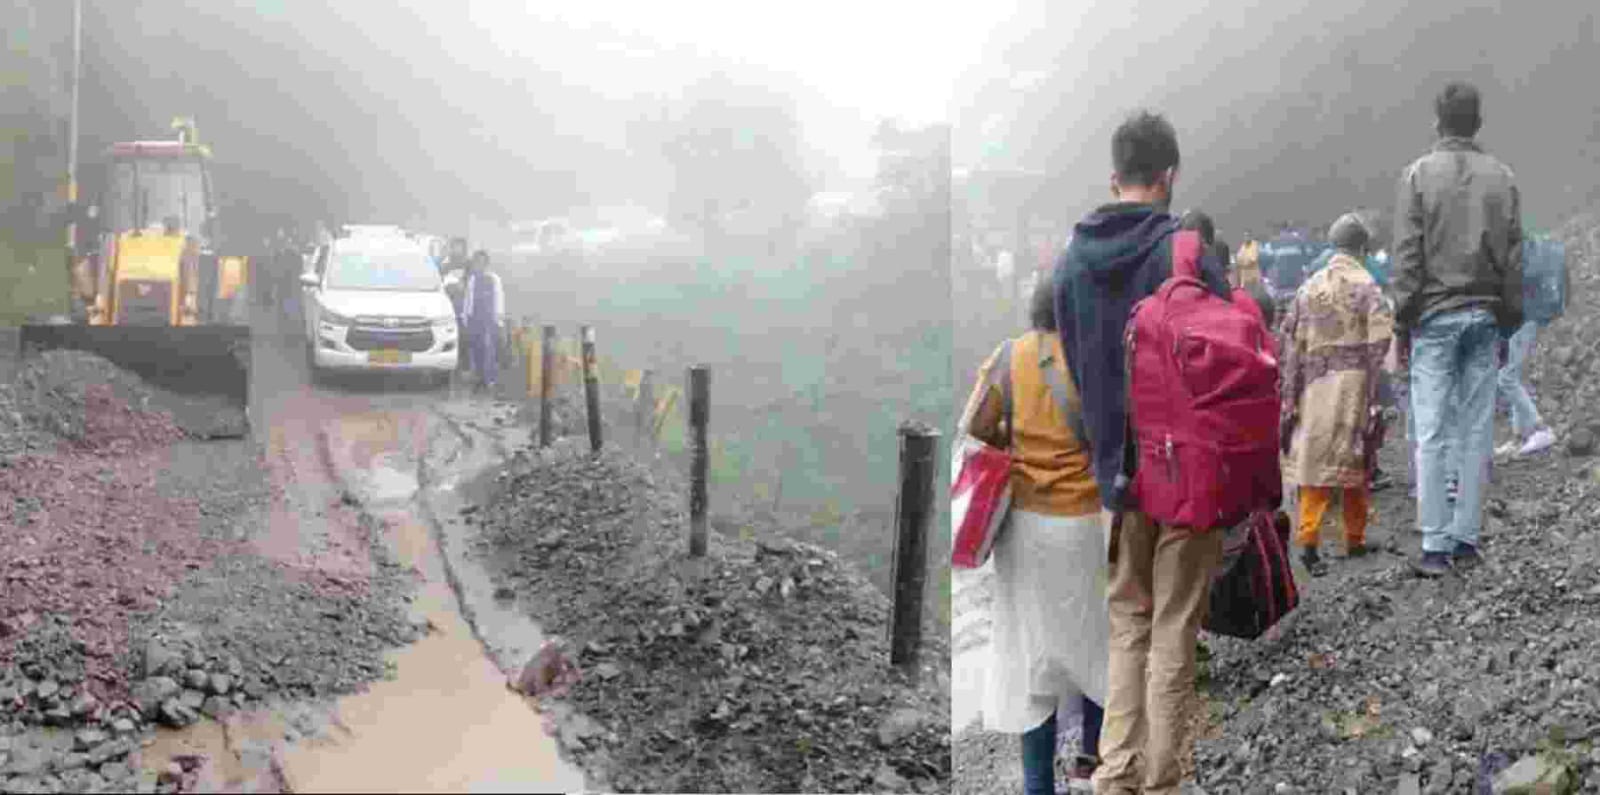 Uttarakhand news: Traffic remained closed for four hours today due to debris on Nainital-Haldwani road